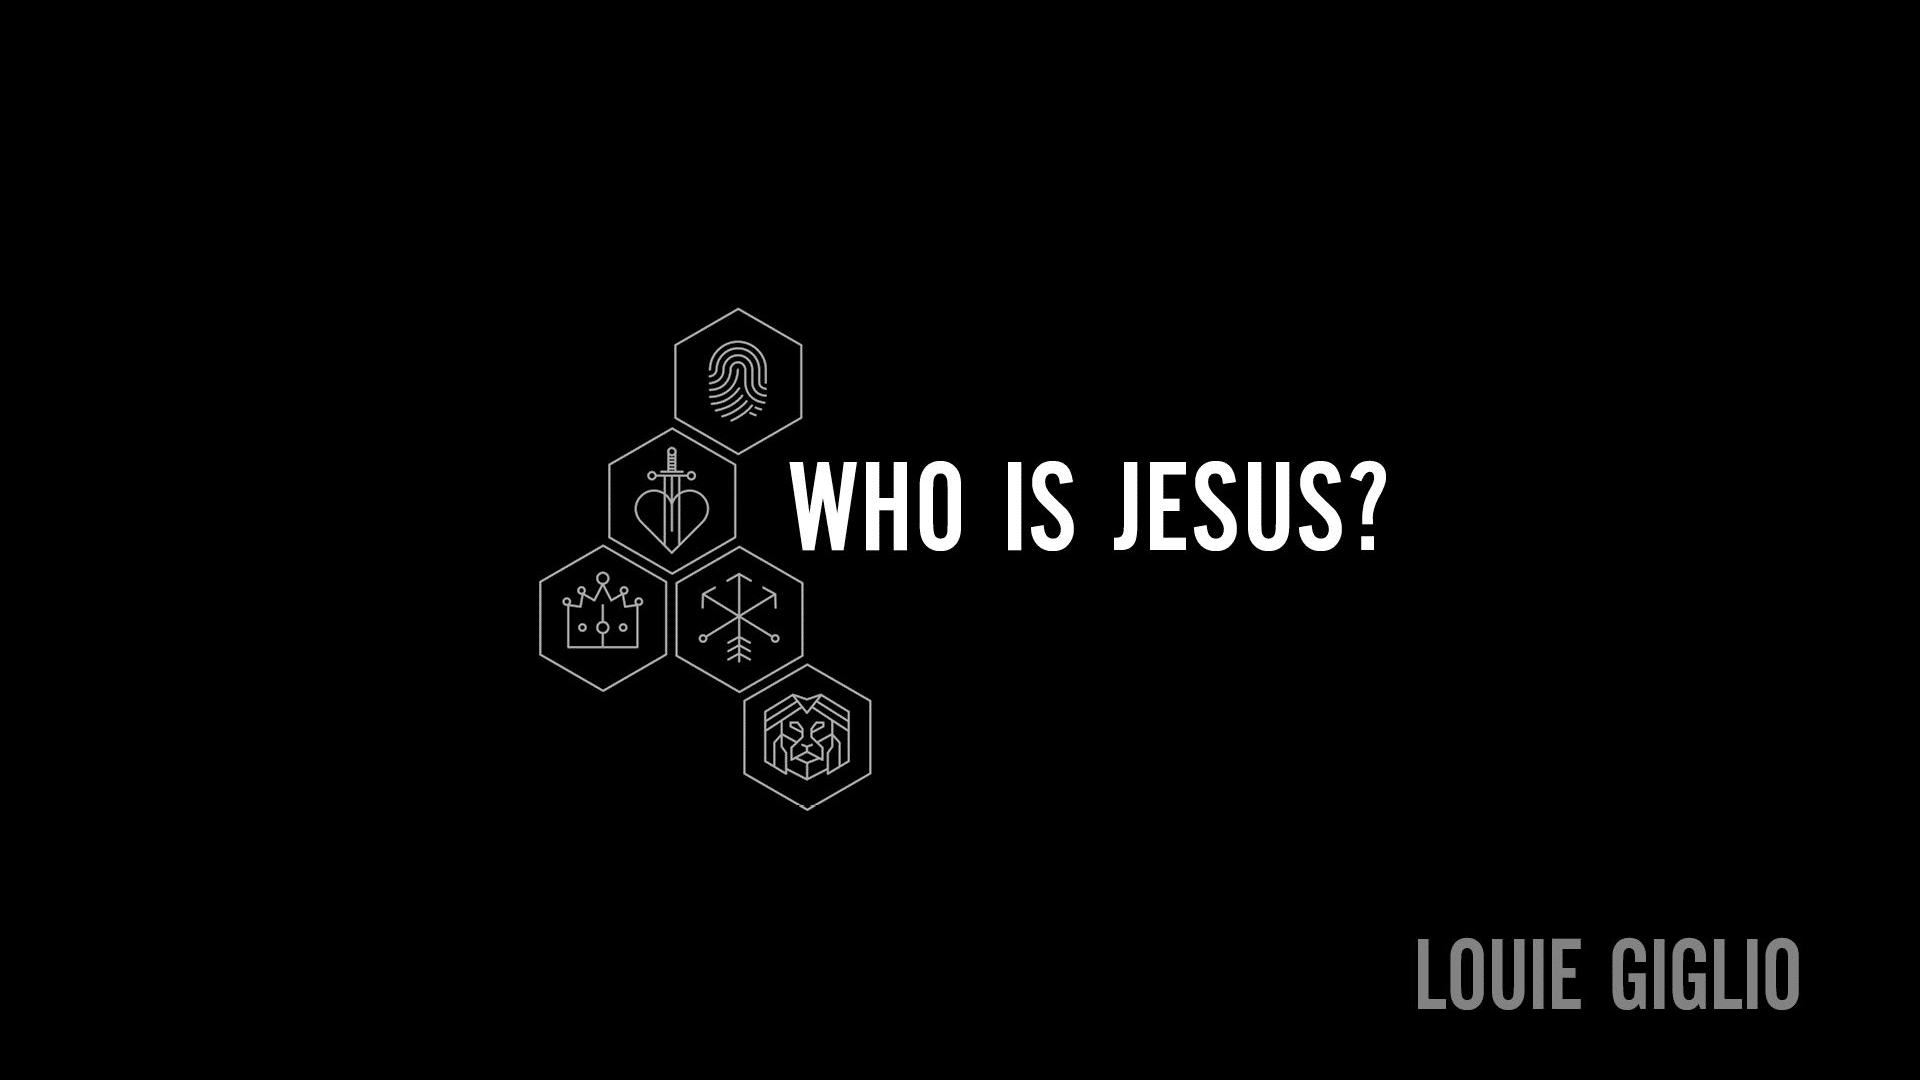 Who is Jesus - Louie Giglio